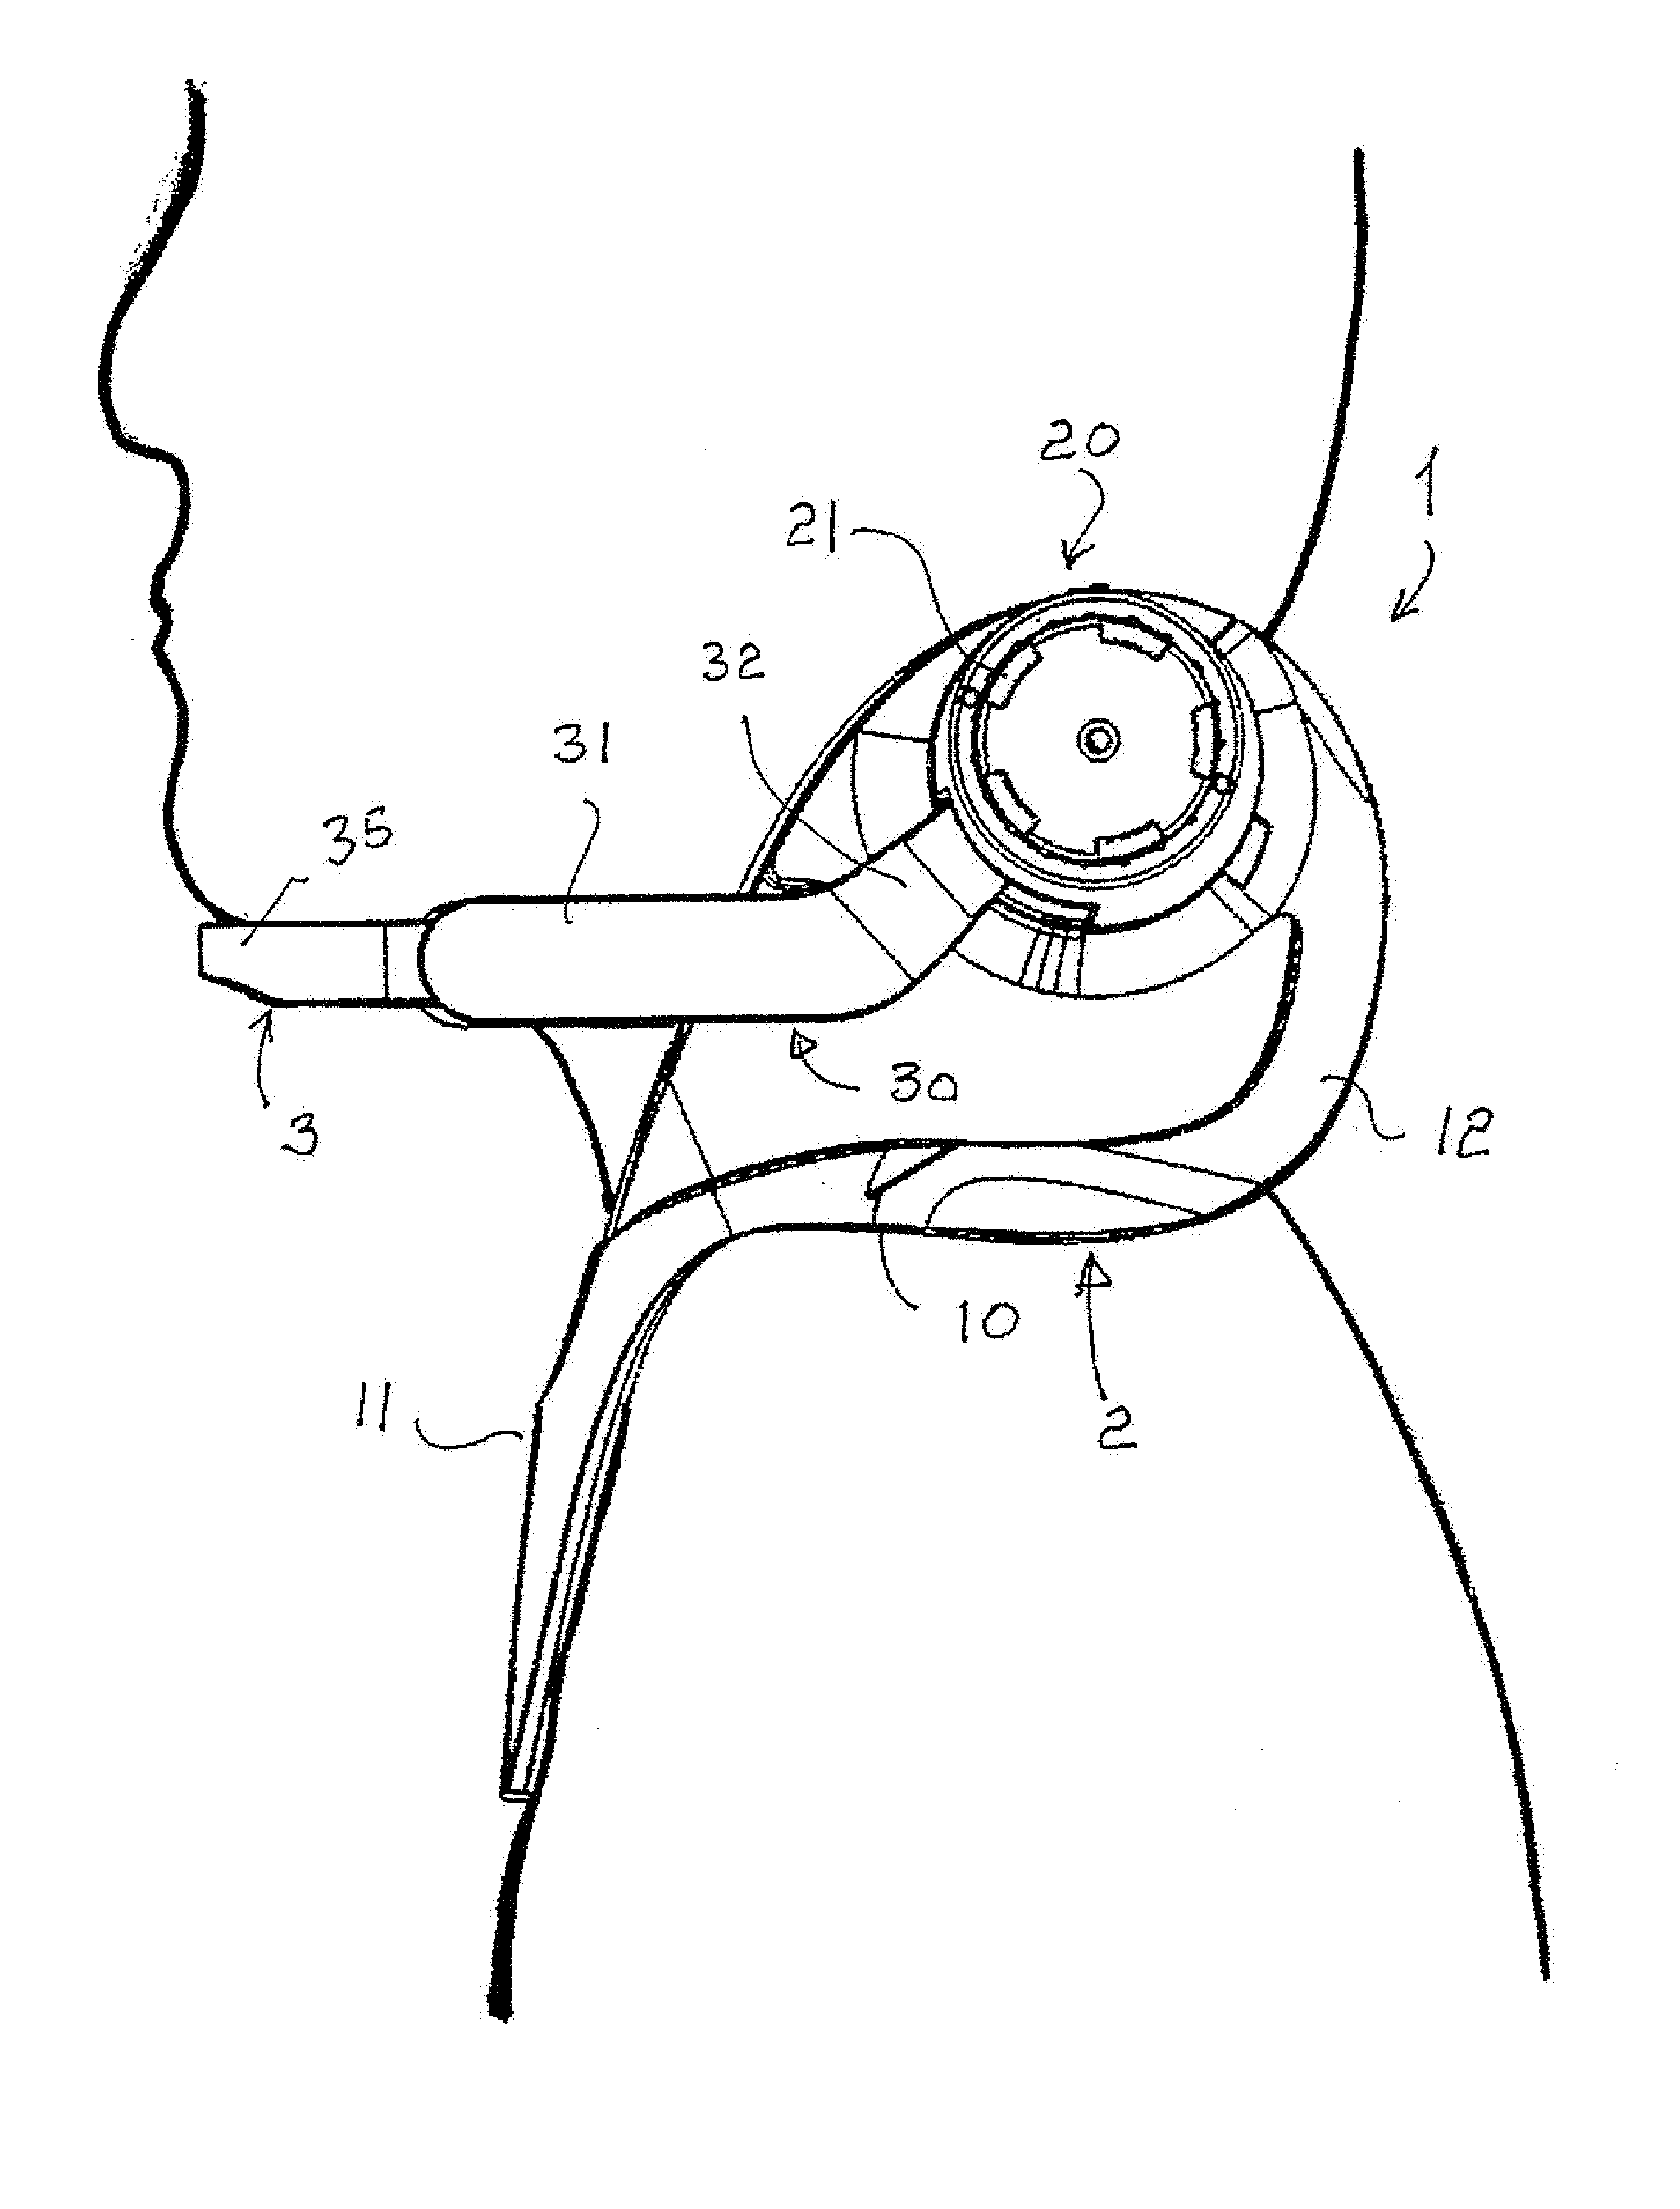 Therapeutic device for neck pain